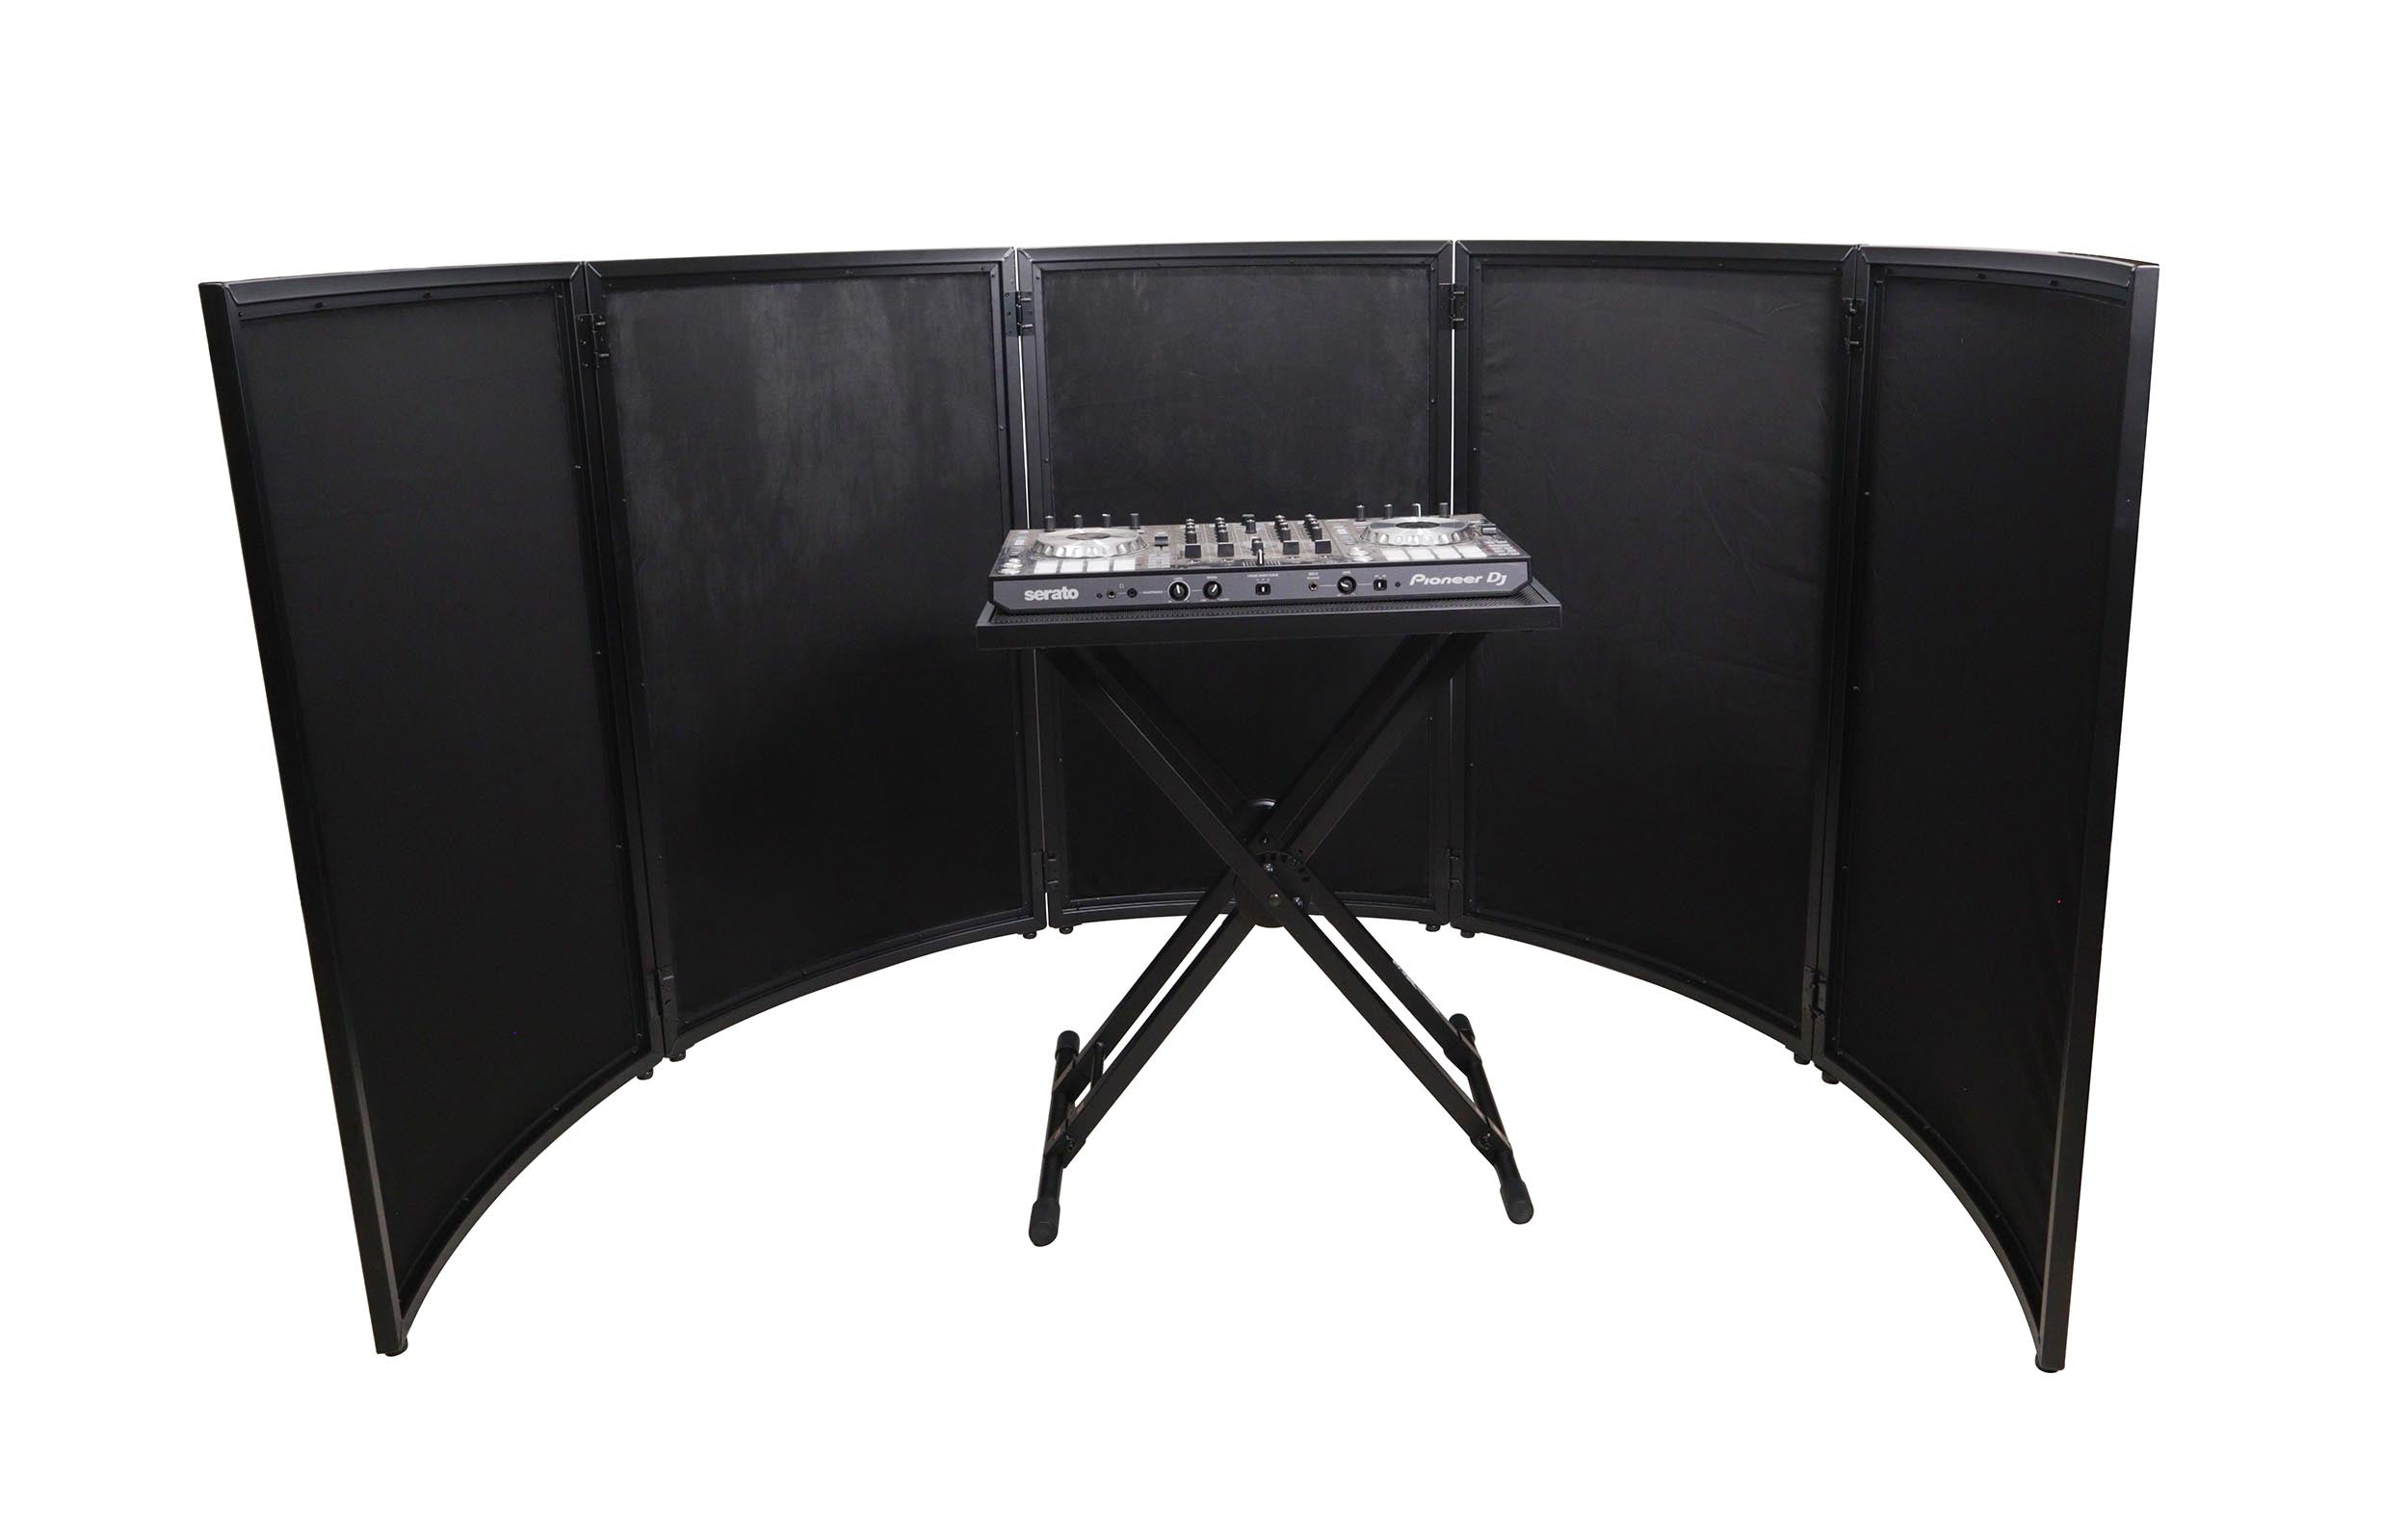 ProX XF-LUNA BLK, DJ Facade 5 Panel Curved with Black White Scrim Kit Black Hardware by ProX Cases